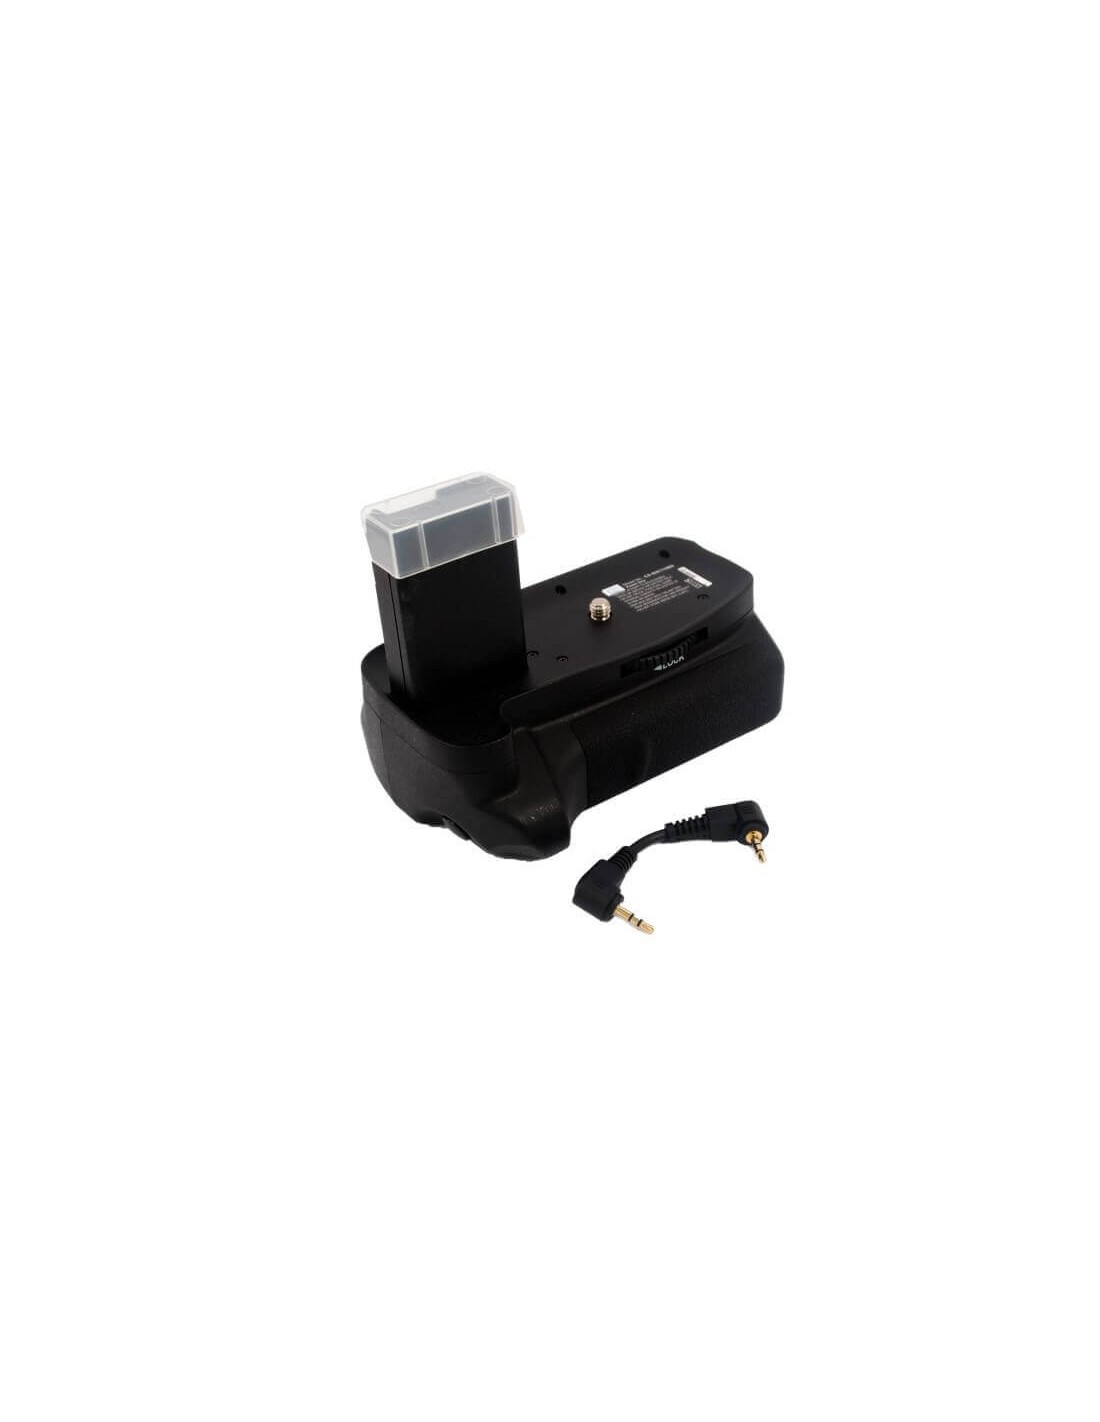 Battery Grip for Canon, Eos 1100d, Eos Kiss X50, Eos Rebel T3 Replaces model:- Bg-e10